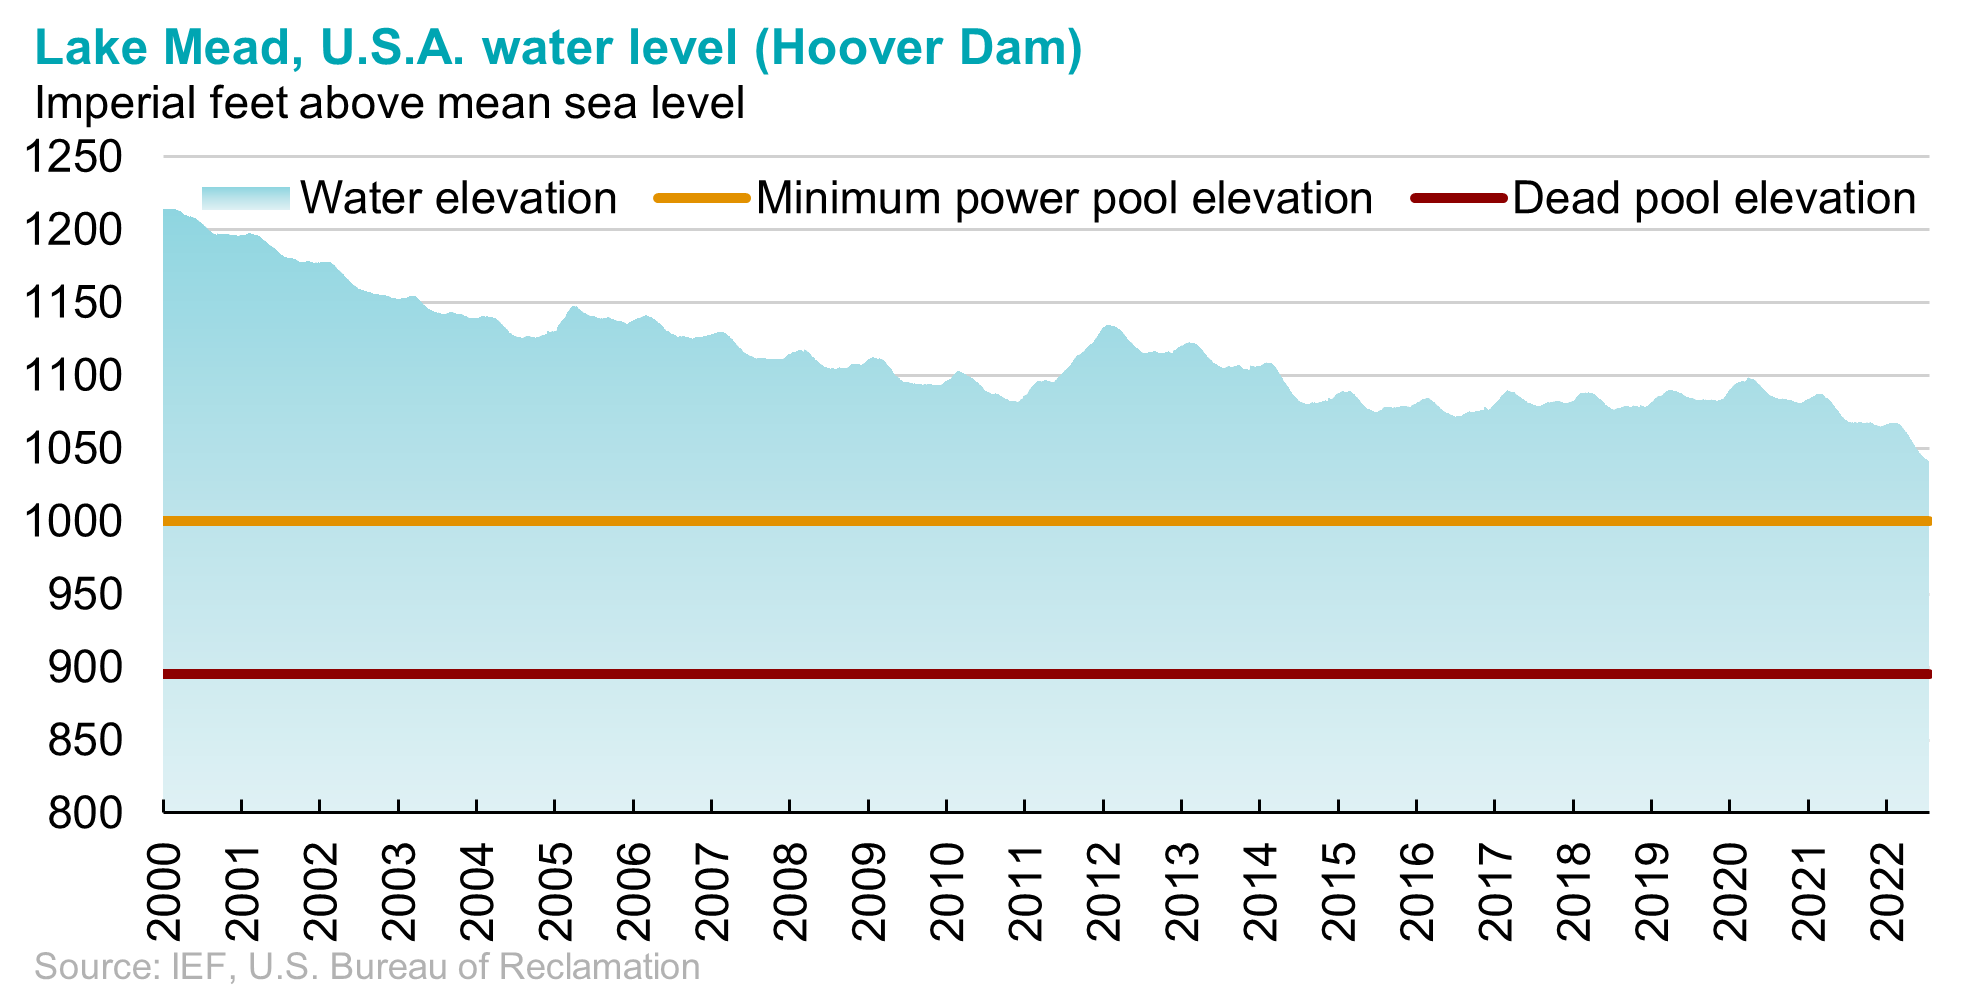 Lake Mead, U.S.A water level (Hoover Dam)